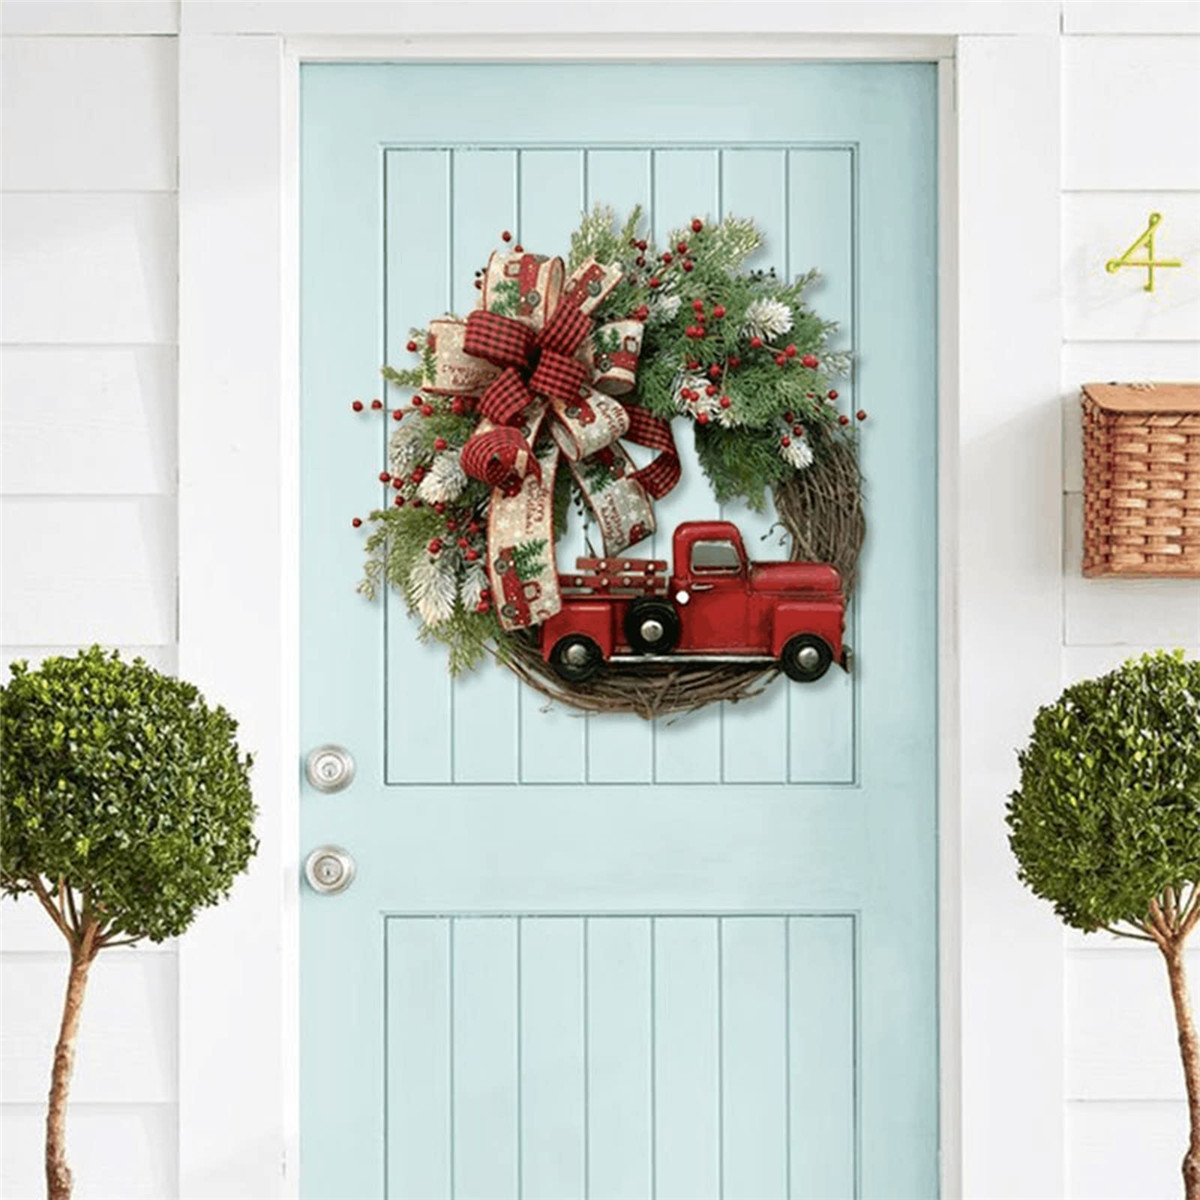 14" Red Truck Christmas Wreath-Vintage Truck Berry Autumn Wreath at The Front Door-Wooden Hanging Wreath for Indoor and Outdoor Decoration - image 4 of 7